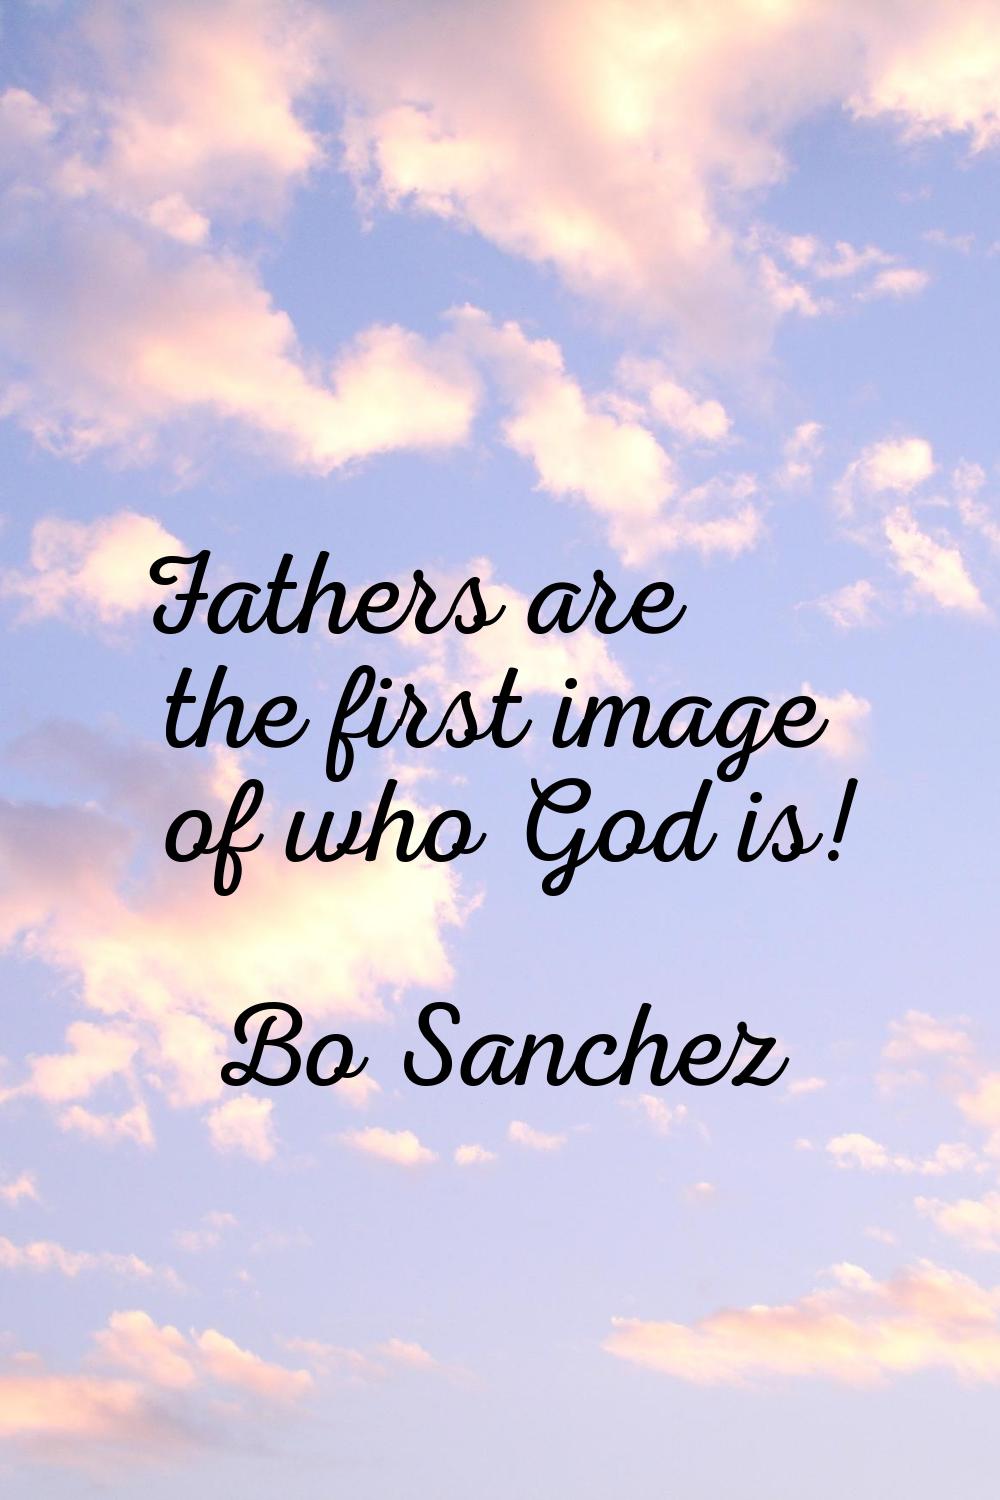 Fathers are the first image of who God is!